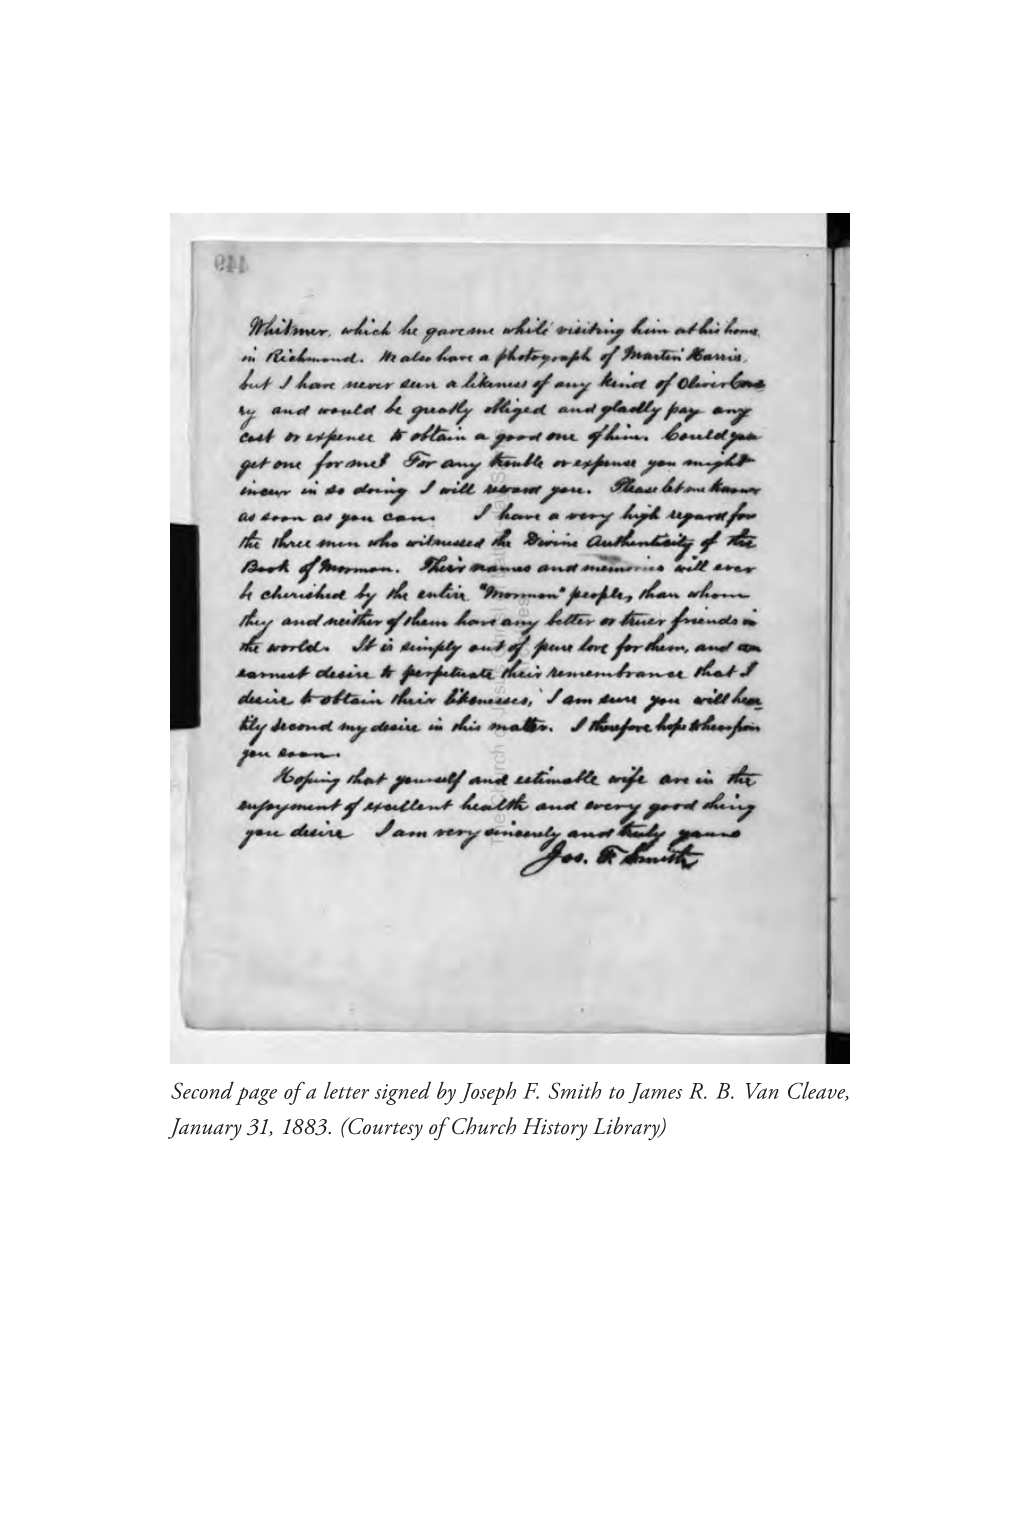 Second Page of a Letter Signed by Joseph F. Smith to James R. B. Van Cleave, January 31, 1883